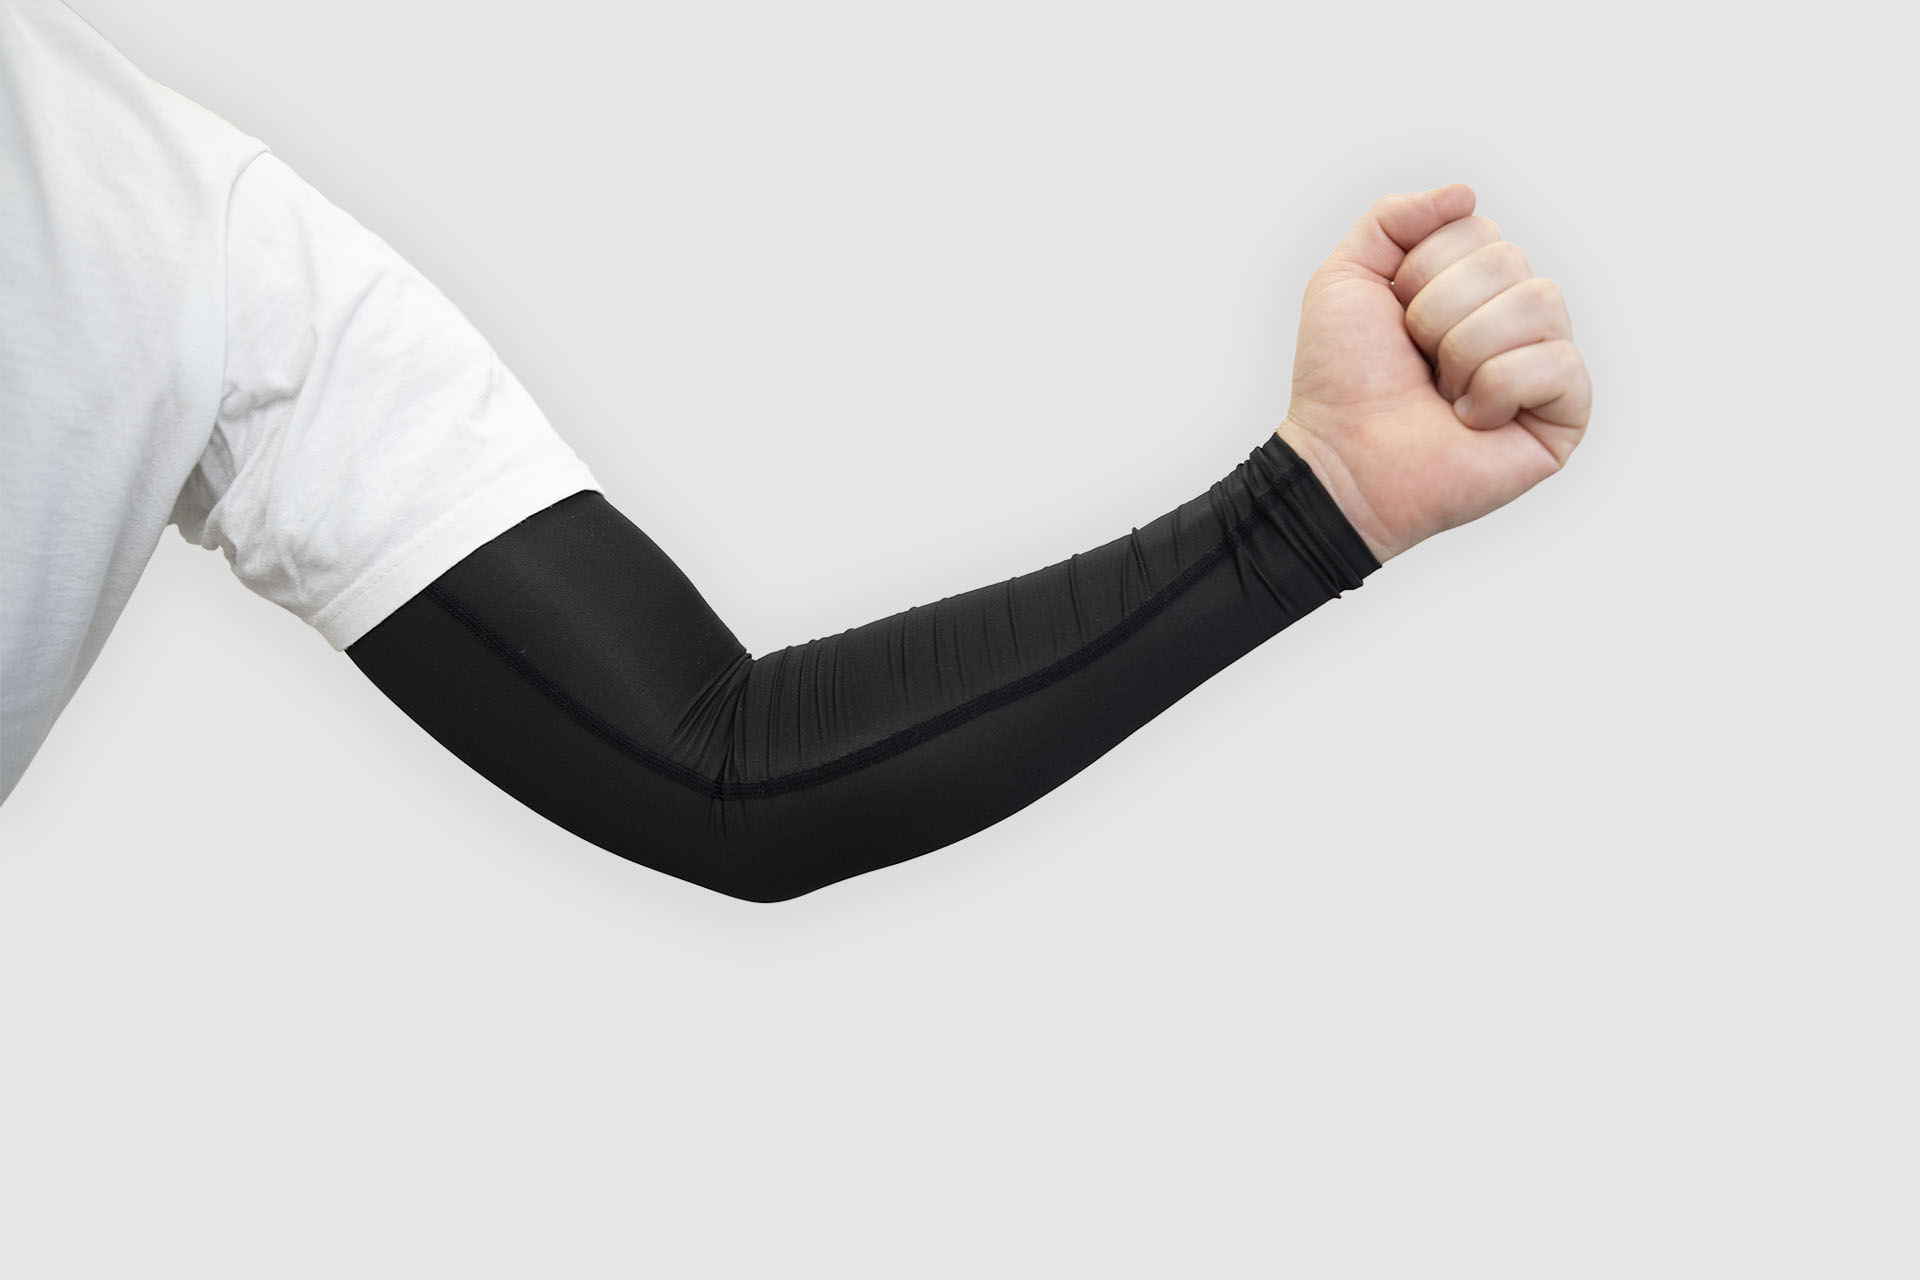 UVI Arm Sleeve for athletes and e-sport players